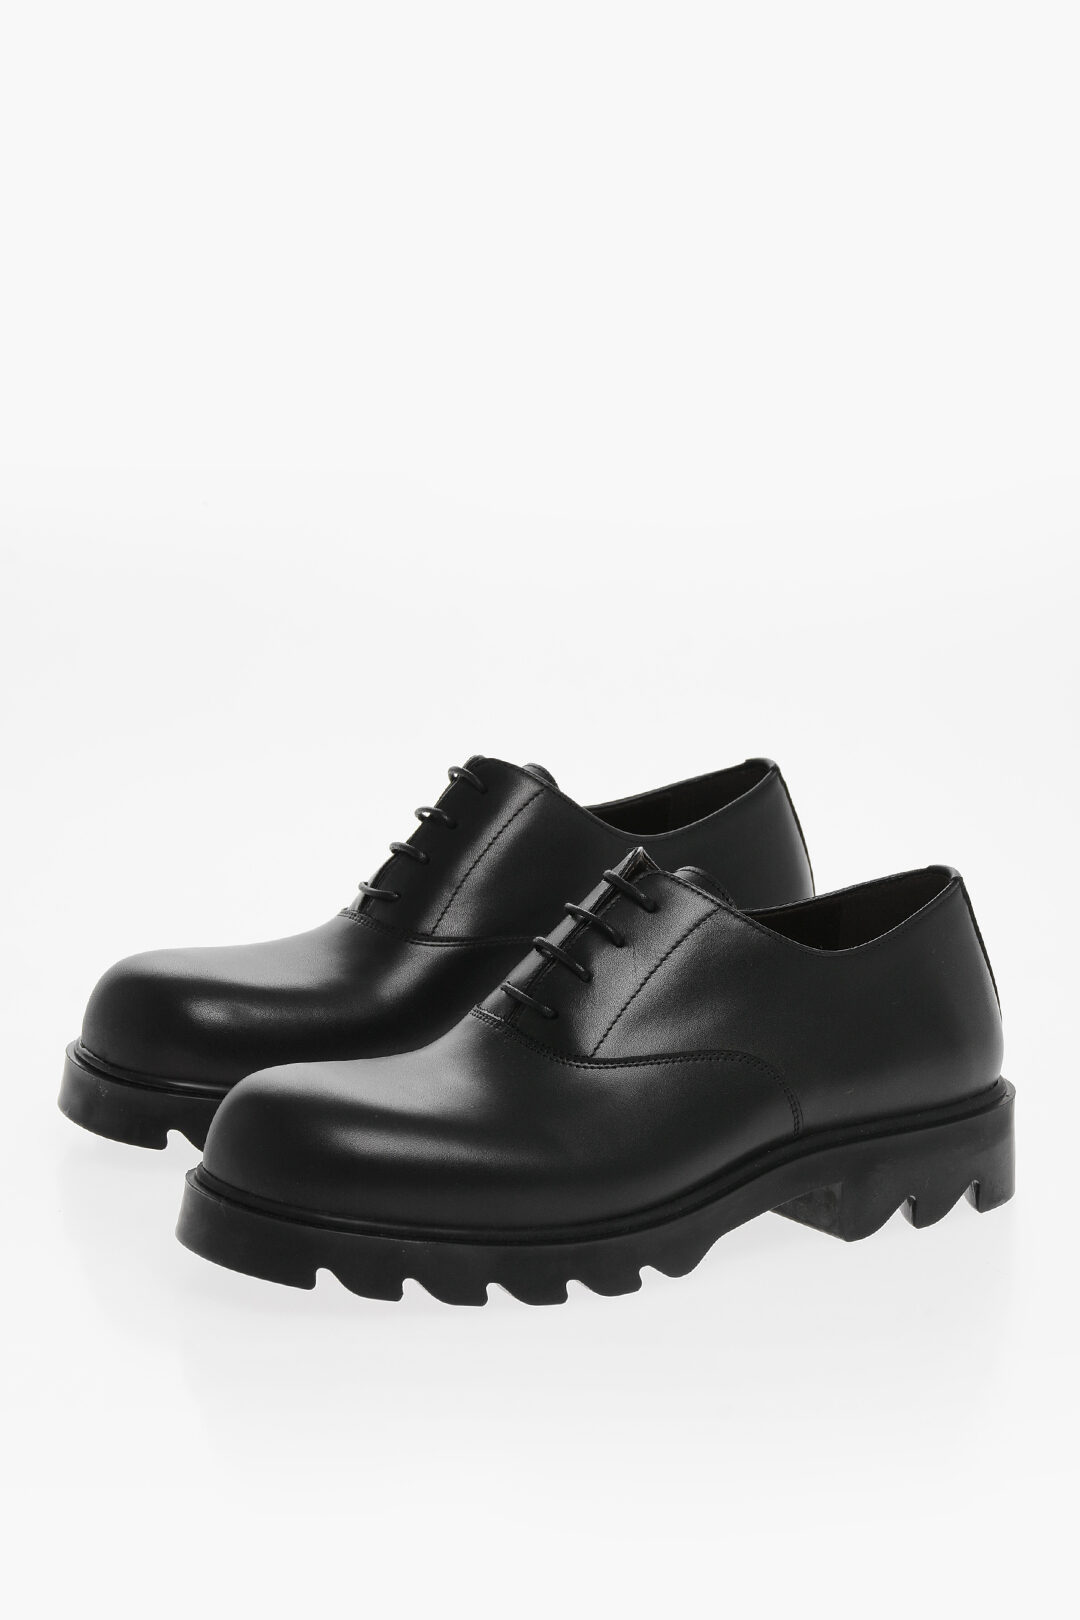 Leather SHIBUYA Derby Shoes with Rubber Sole